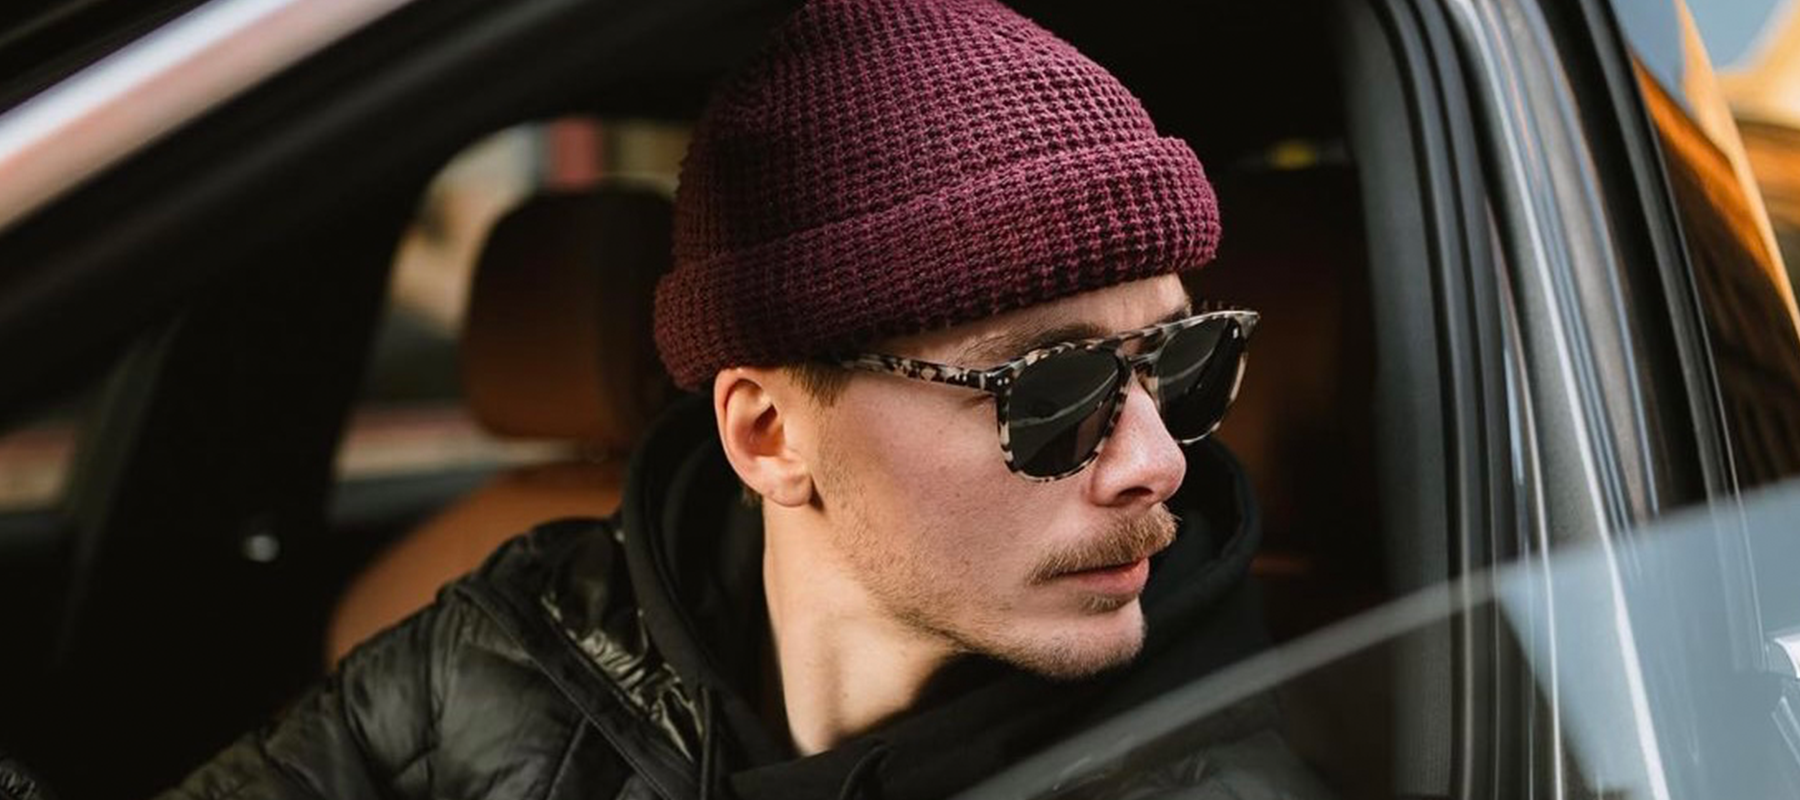 The Best Sunglasses For Driving